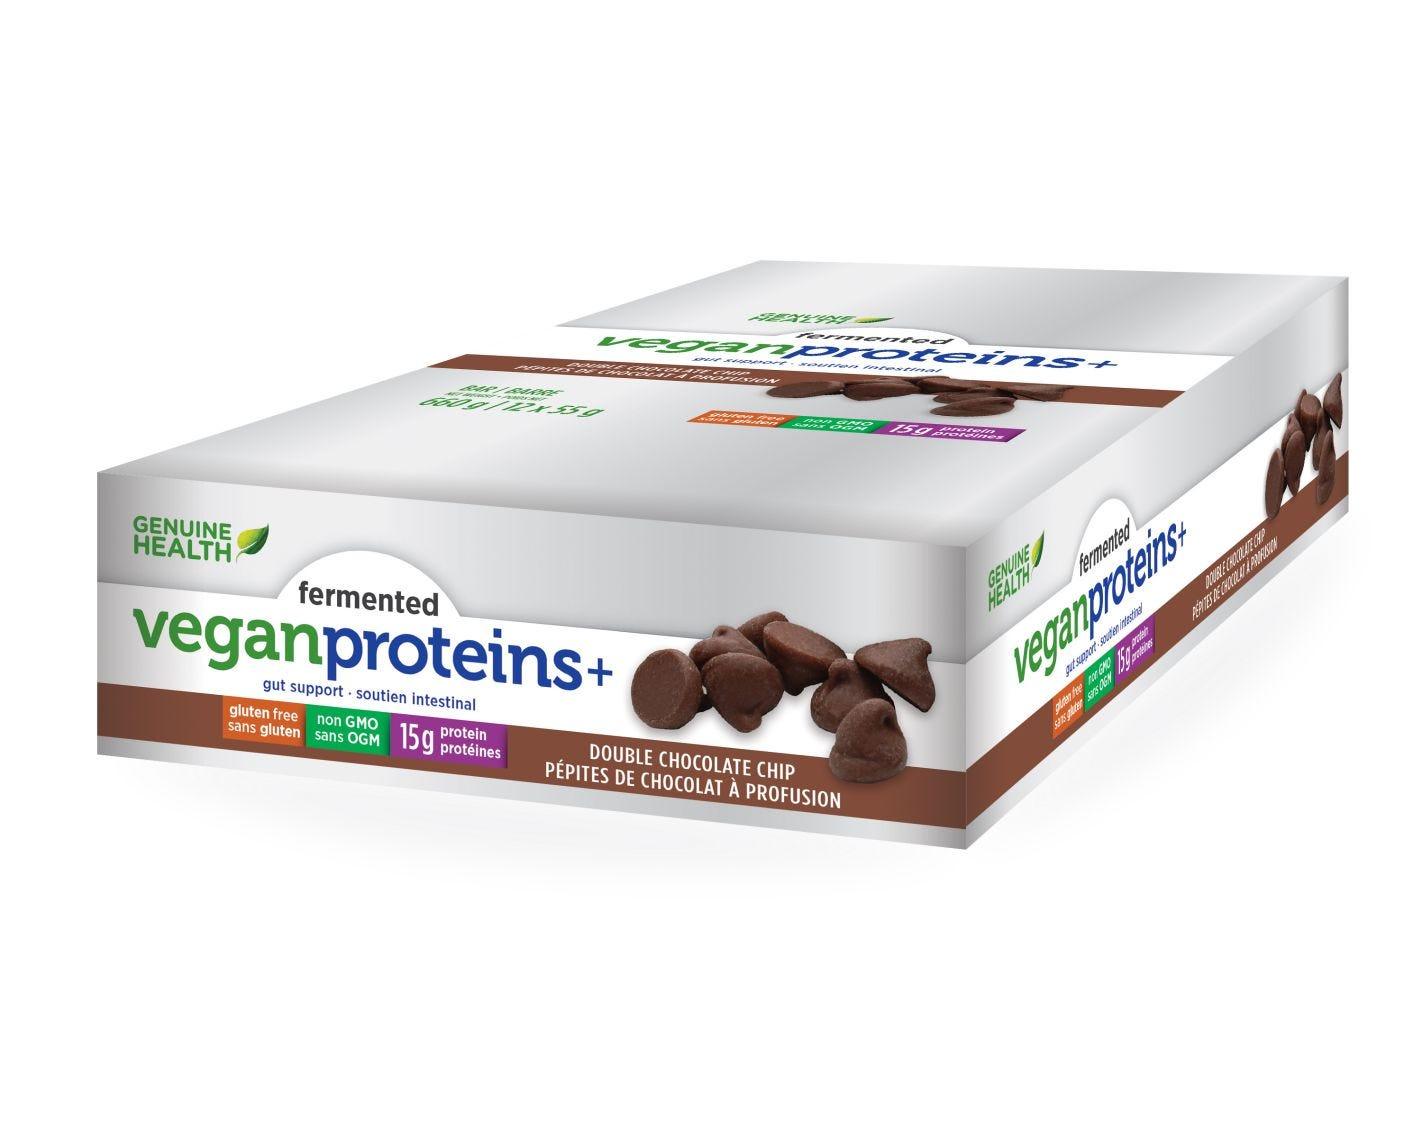 Genuine Health fermented Vegan proteins+ bar - Double Chocolate Chip